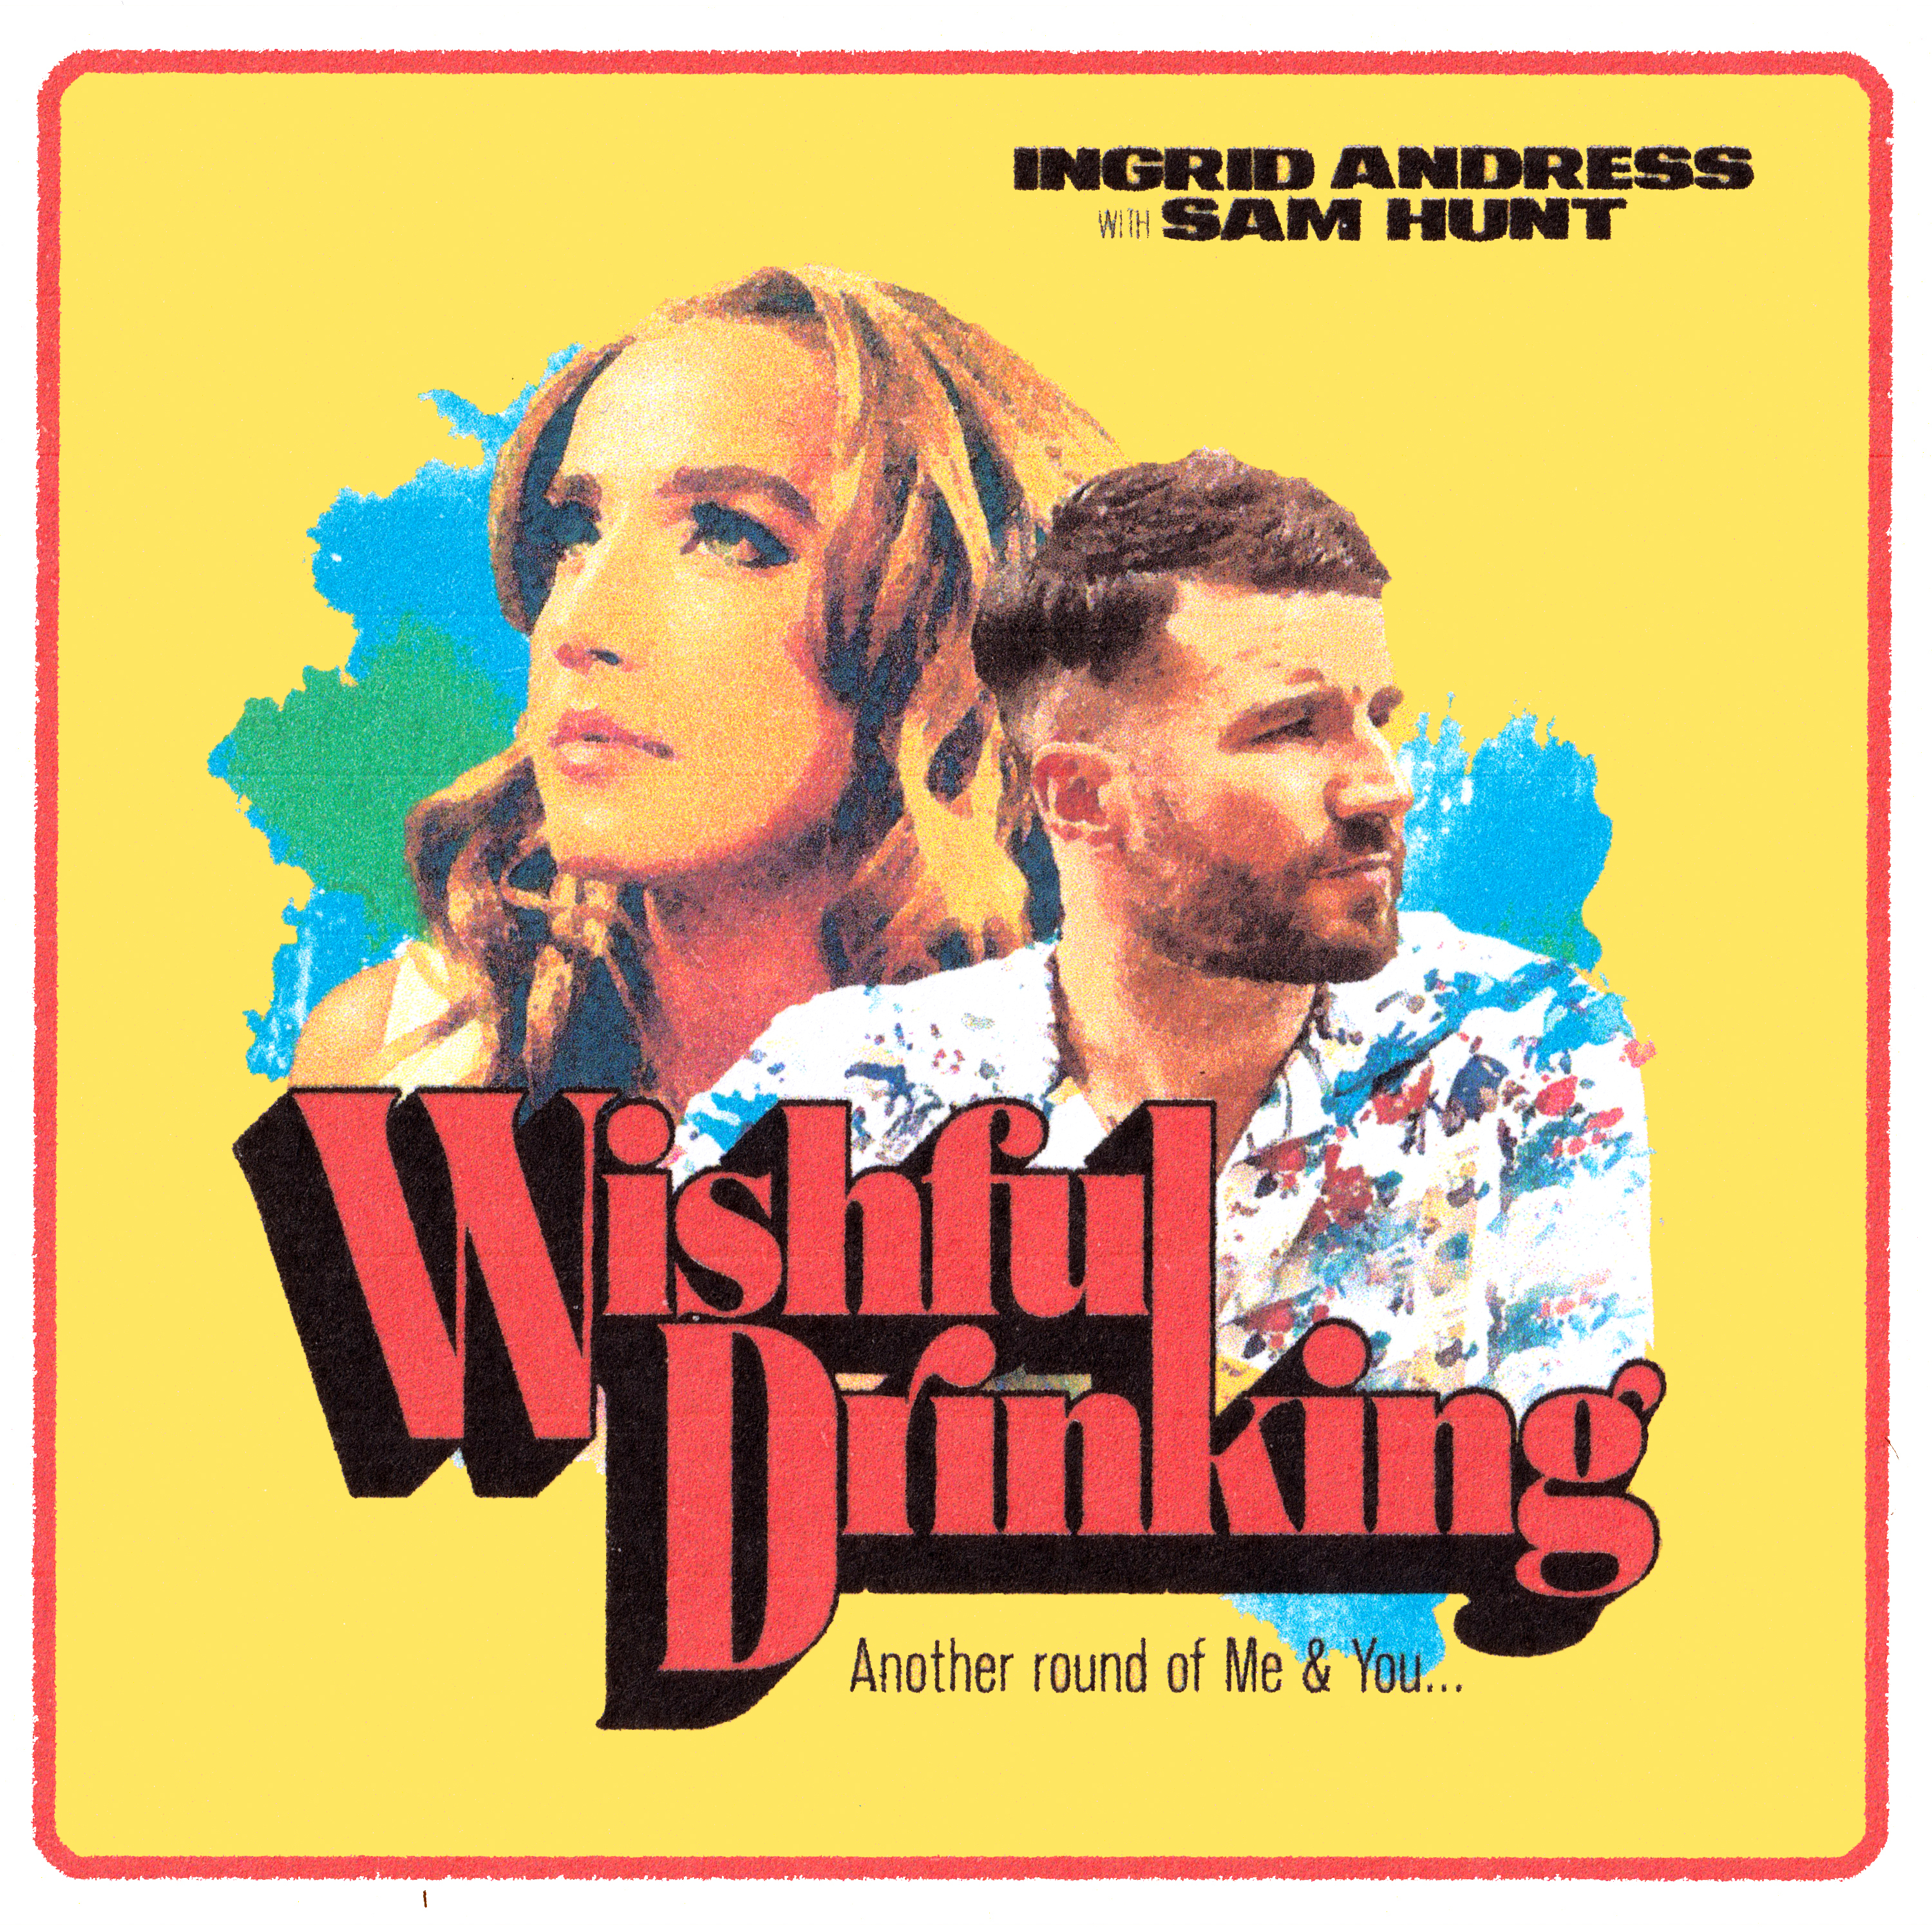 INGRID ANDRESS’ NEW SINGLE “WISHFUL DRINKING” WITH SAM HUNT IS TOP 3 MOST ADDED AT COUNTRY RADIO